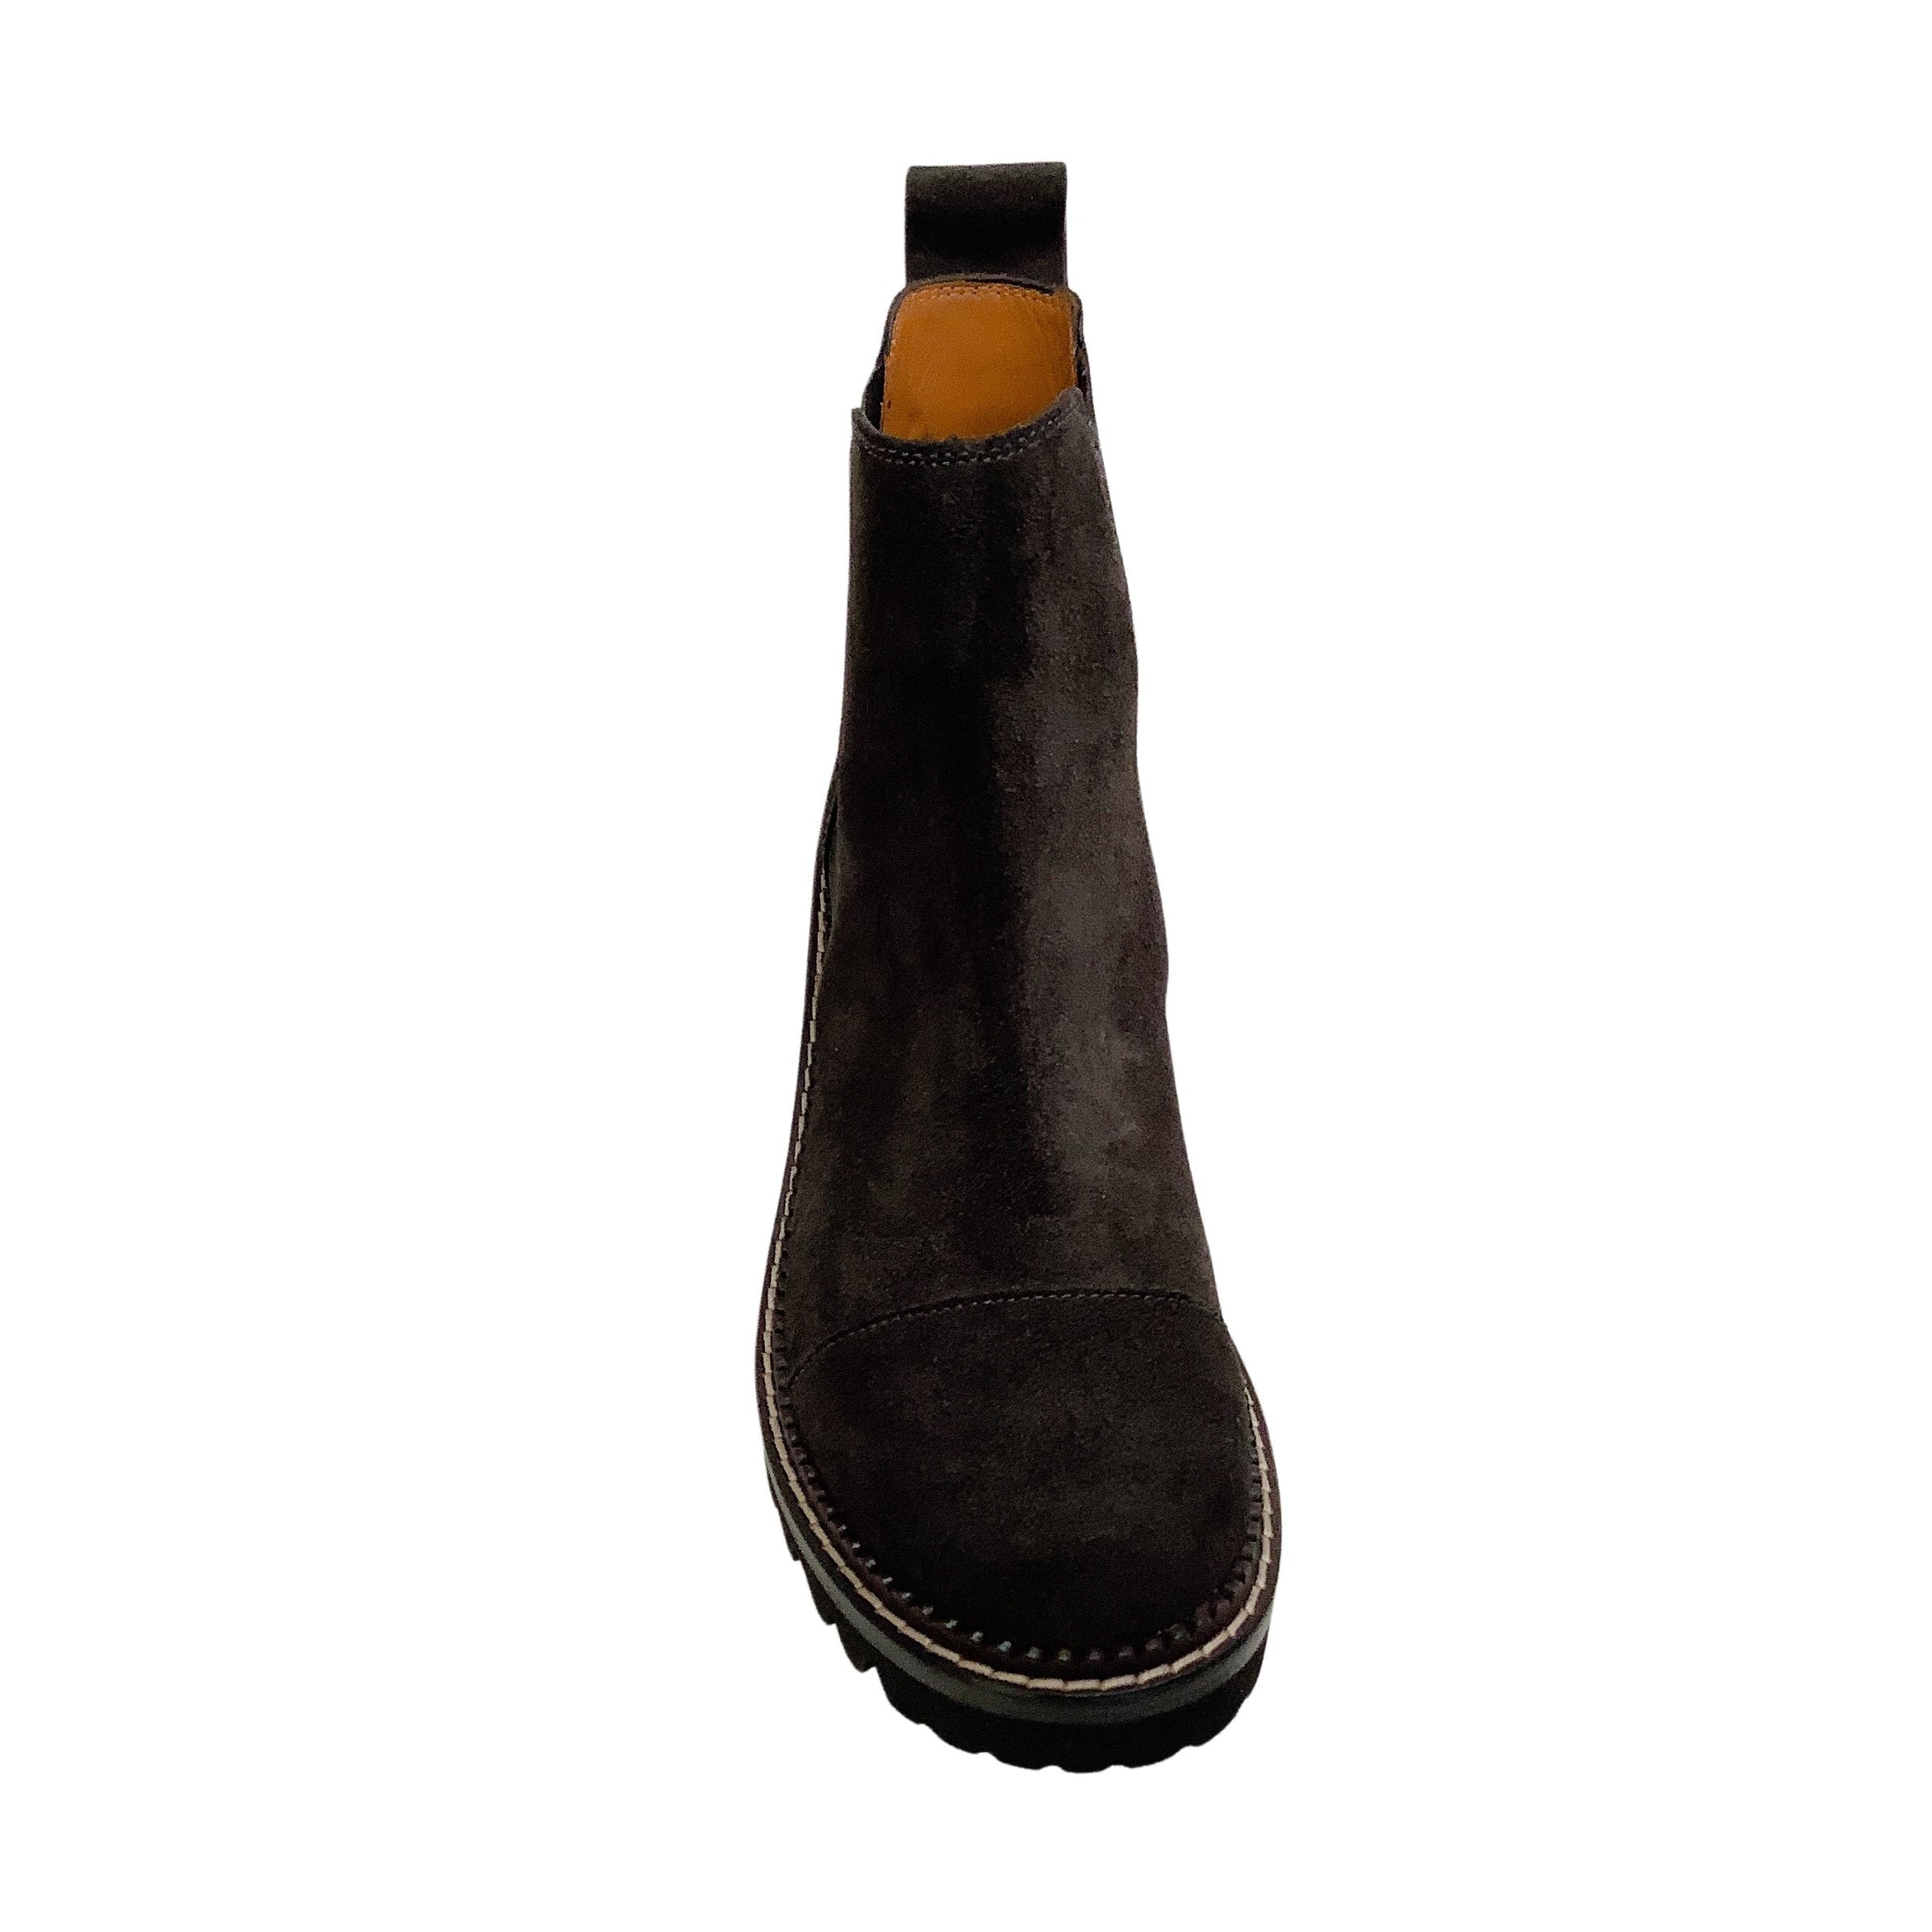 See by Chloe Graphite Suede Mallory Chelsea Boots